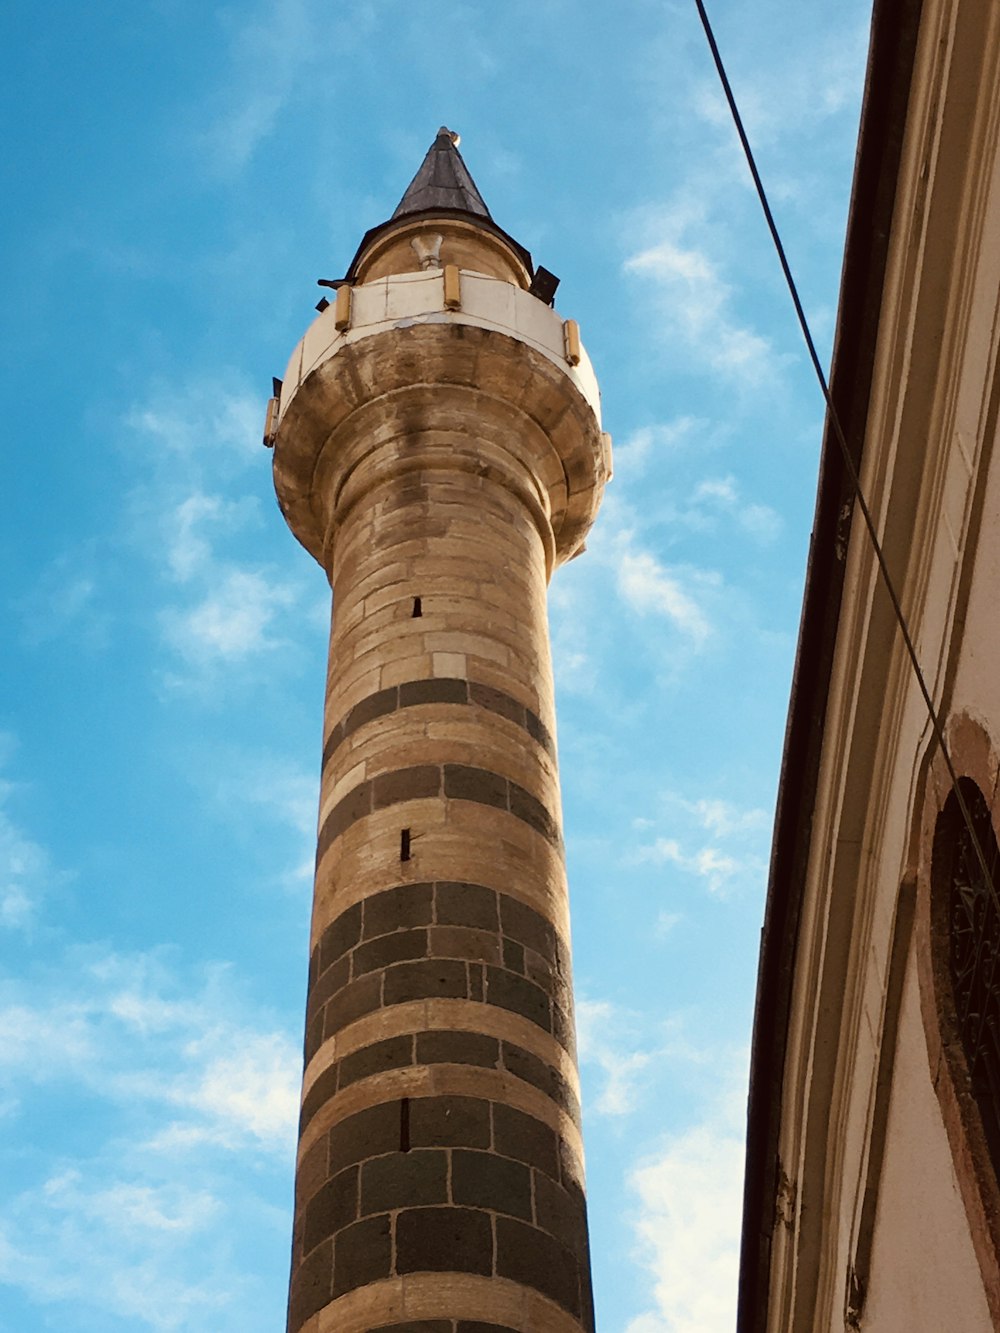 a tall tower with a circular top